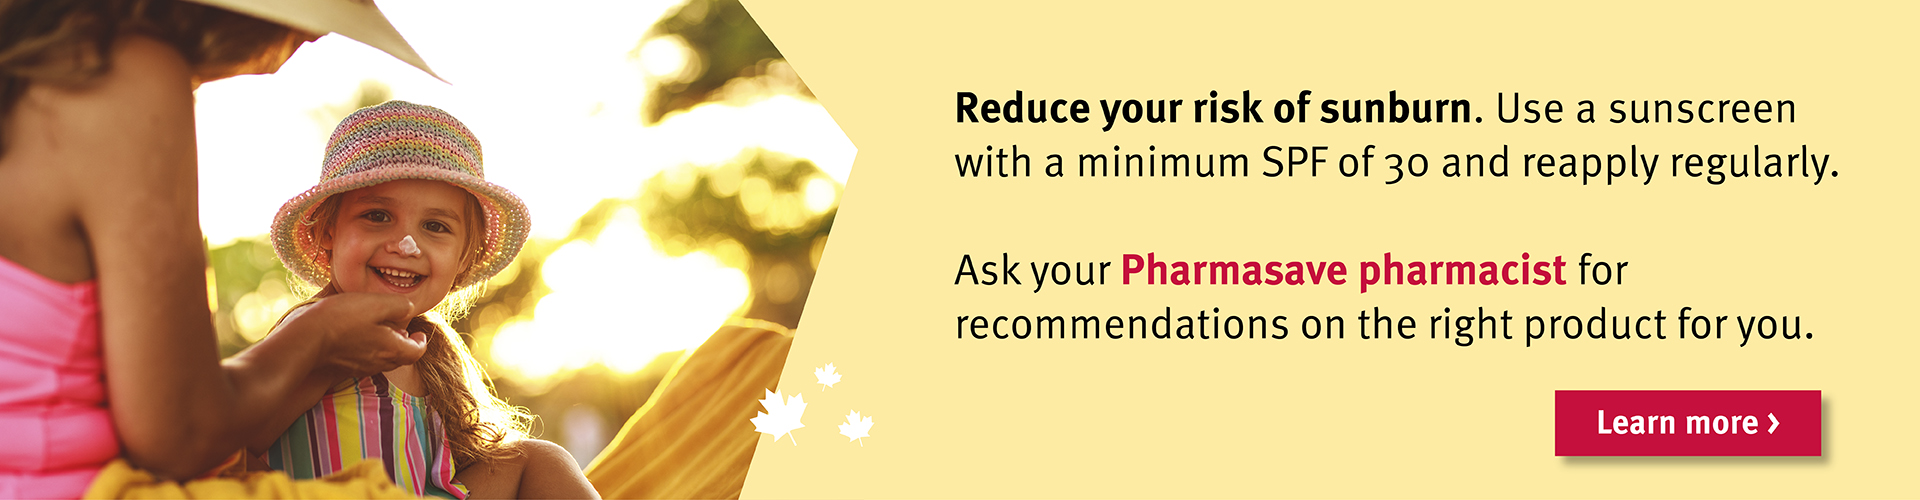 Reduce your risk of sunburn. Ask your Pharmasave pharmacist for recommendations.